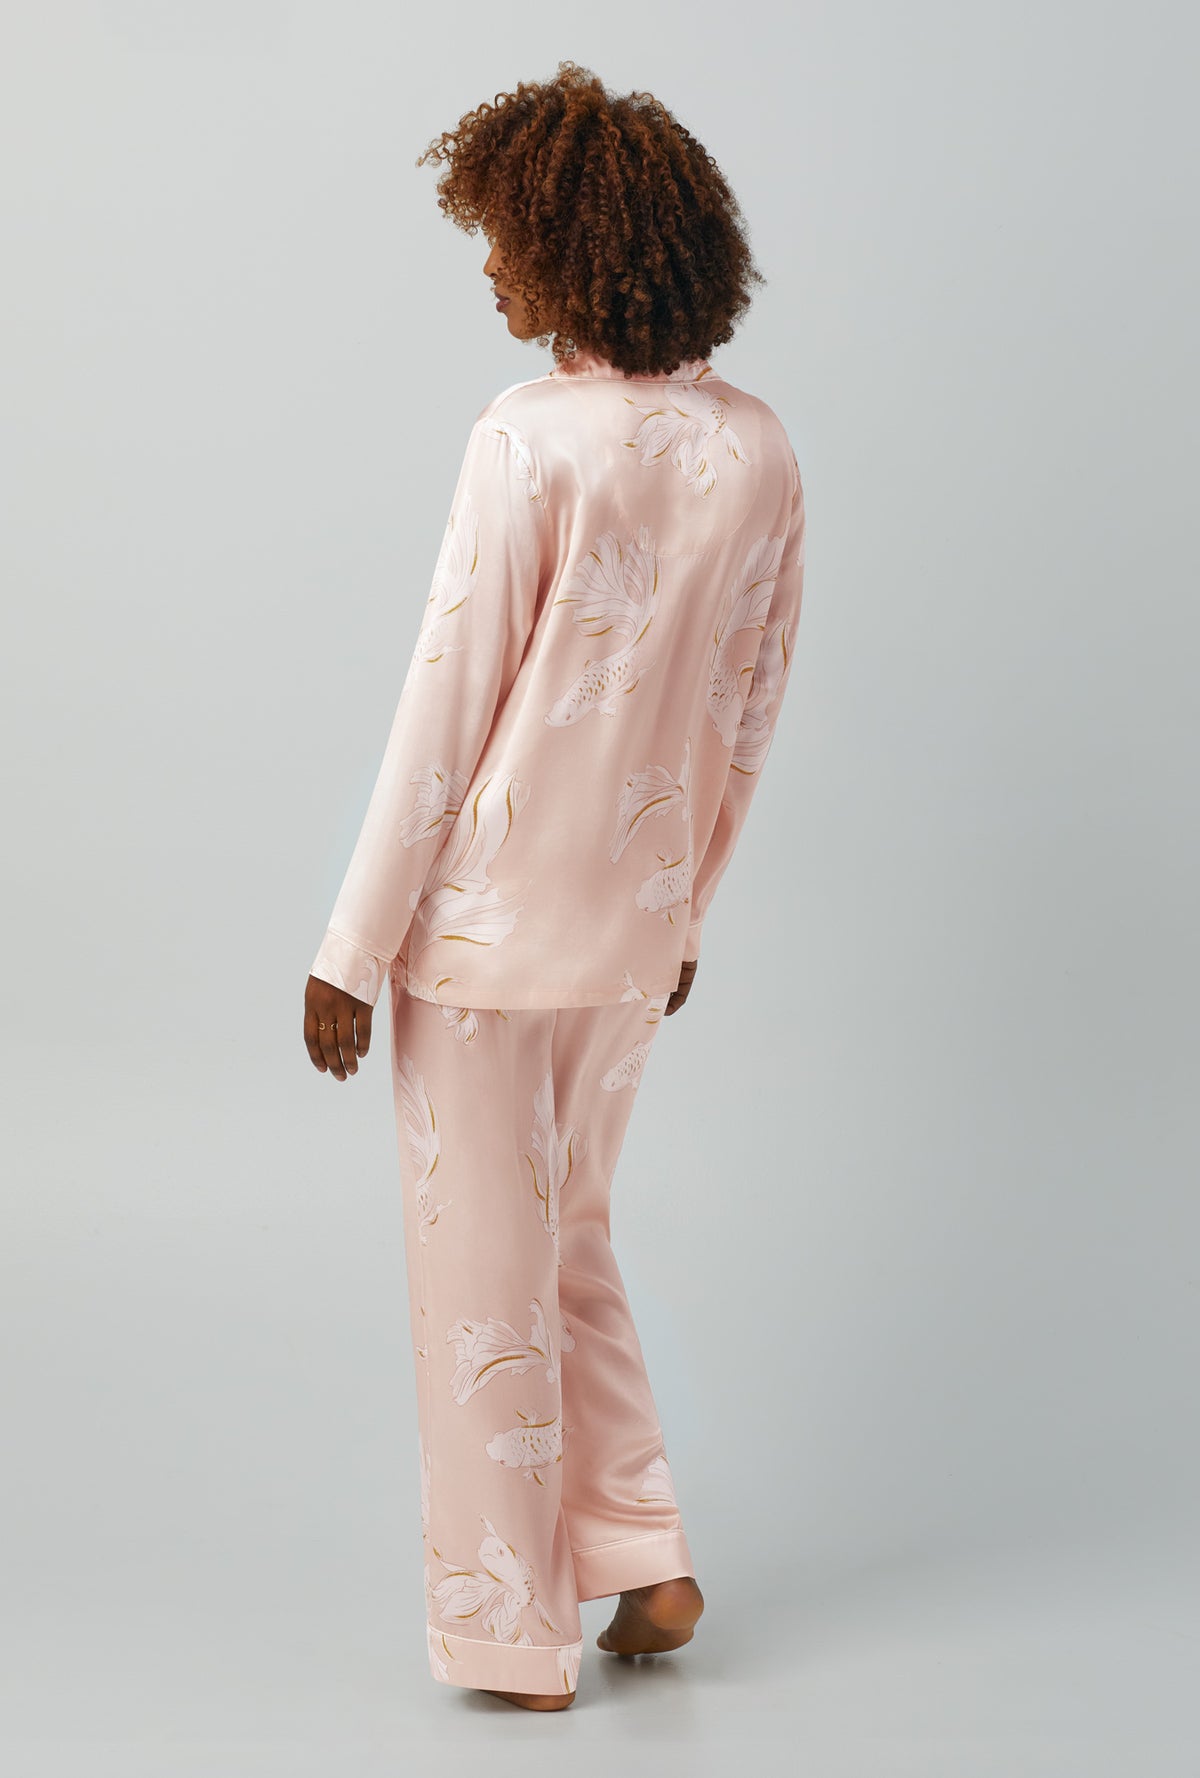 A lady wearing Long Sleeve Classic Washable Silk PJ Set with koi pond print